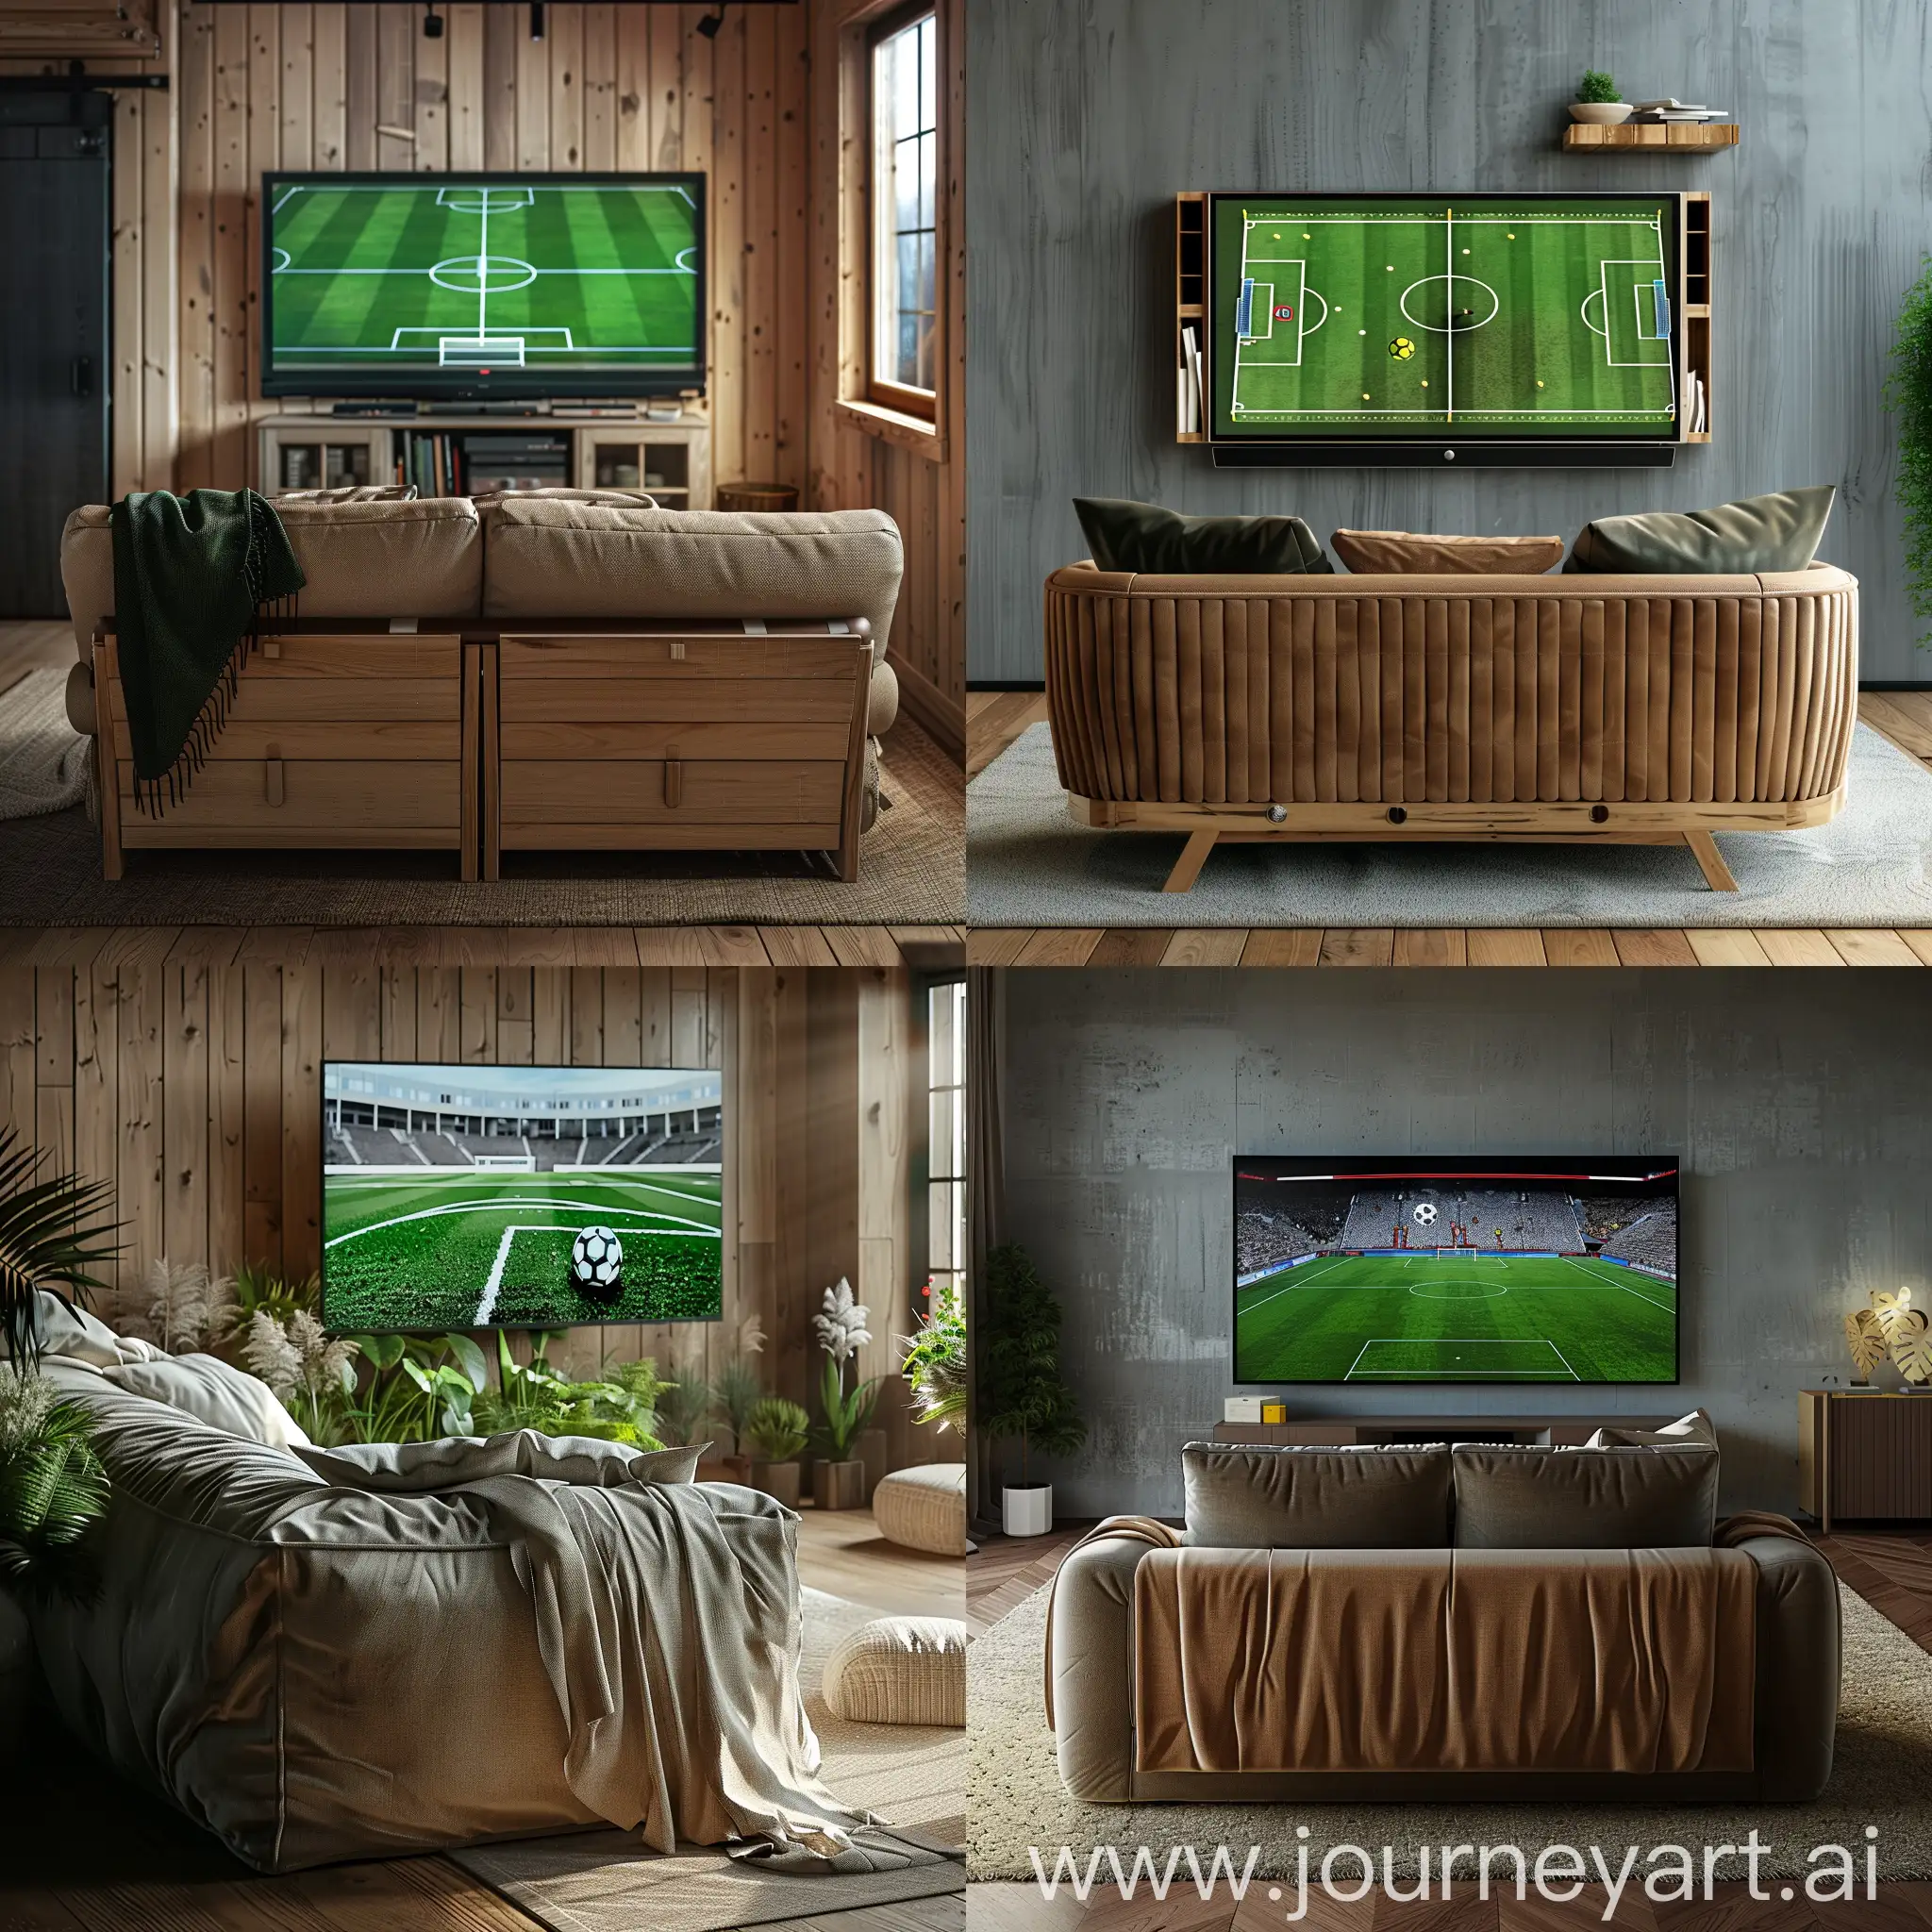 Nordic-Living-Room-with-Soccer-Field-TV-Display